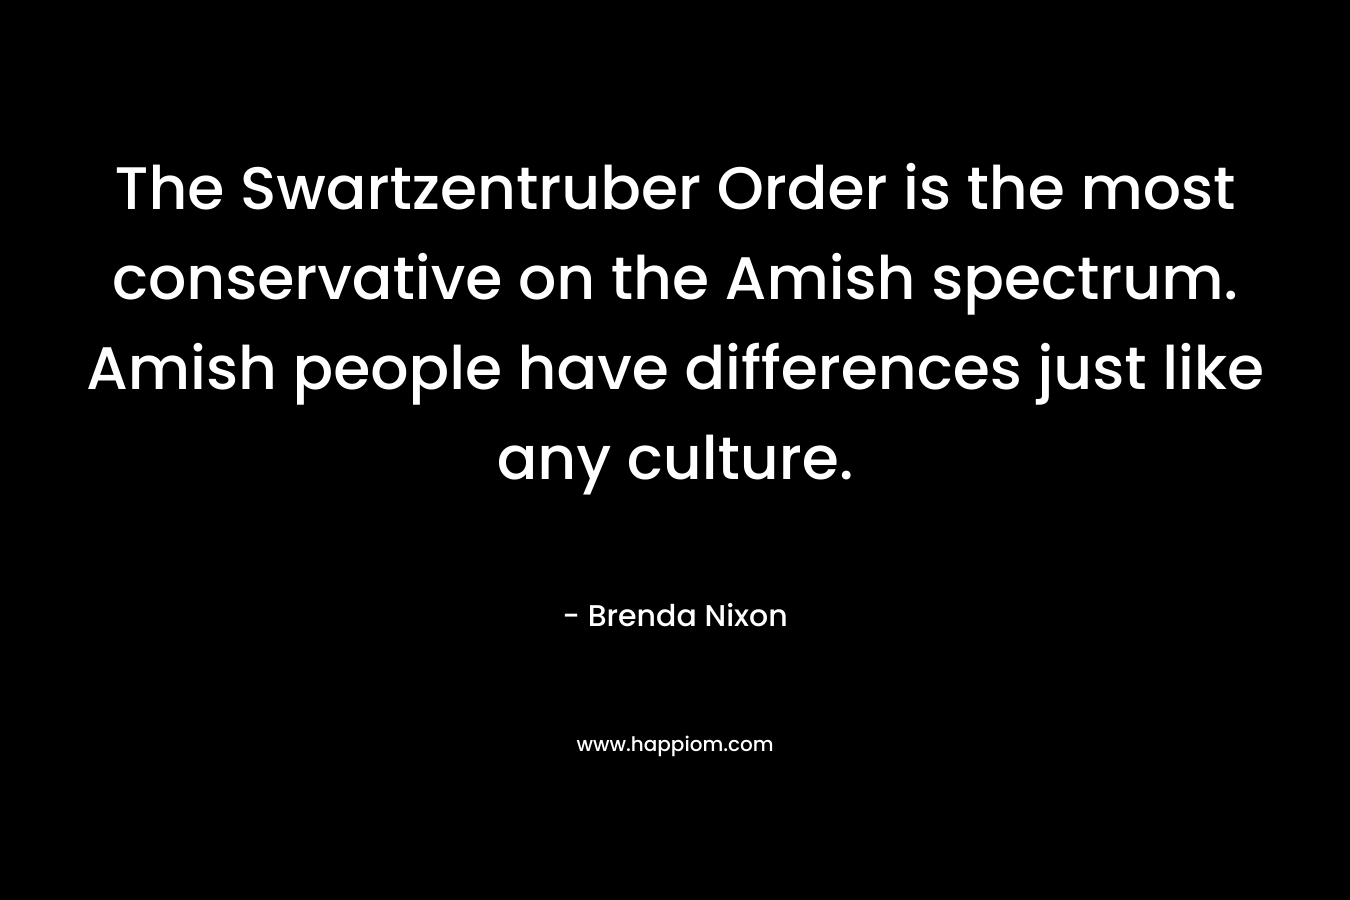 The Swartzentruber Order is the most conservative on the Amish spectrum. Amish people have differences just like any culture.